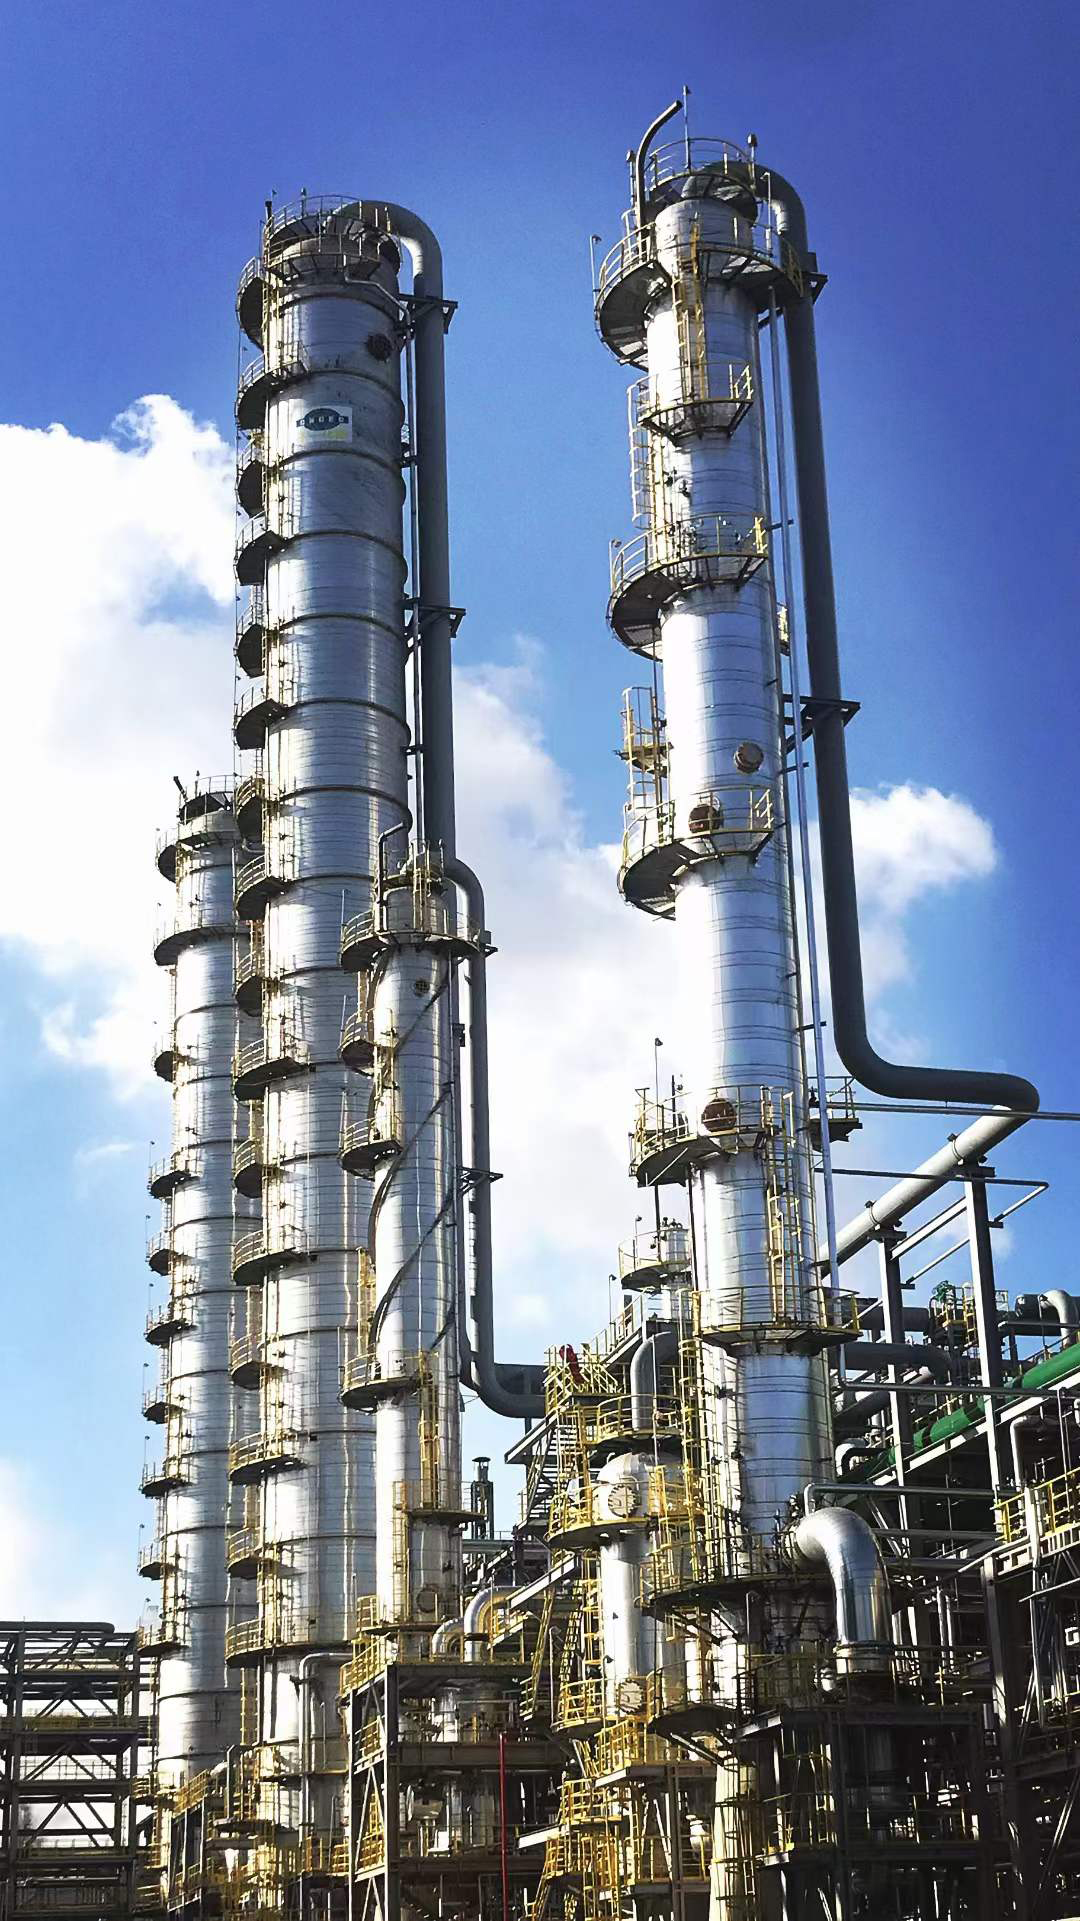 Sulzer has completed the start-up of the world’s largest facility for styrene extraction from pygas derived from naphtha cracking at Zhejiang Petroleum & Chemical Co., Ltd.’s (ZPC) integrated refining and petrochemical complex.